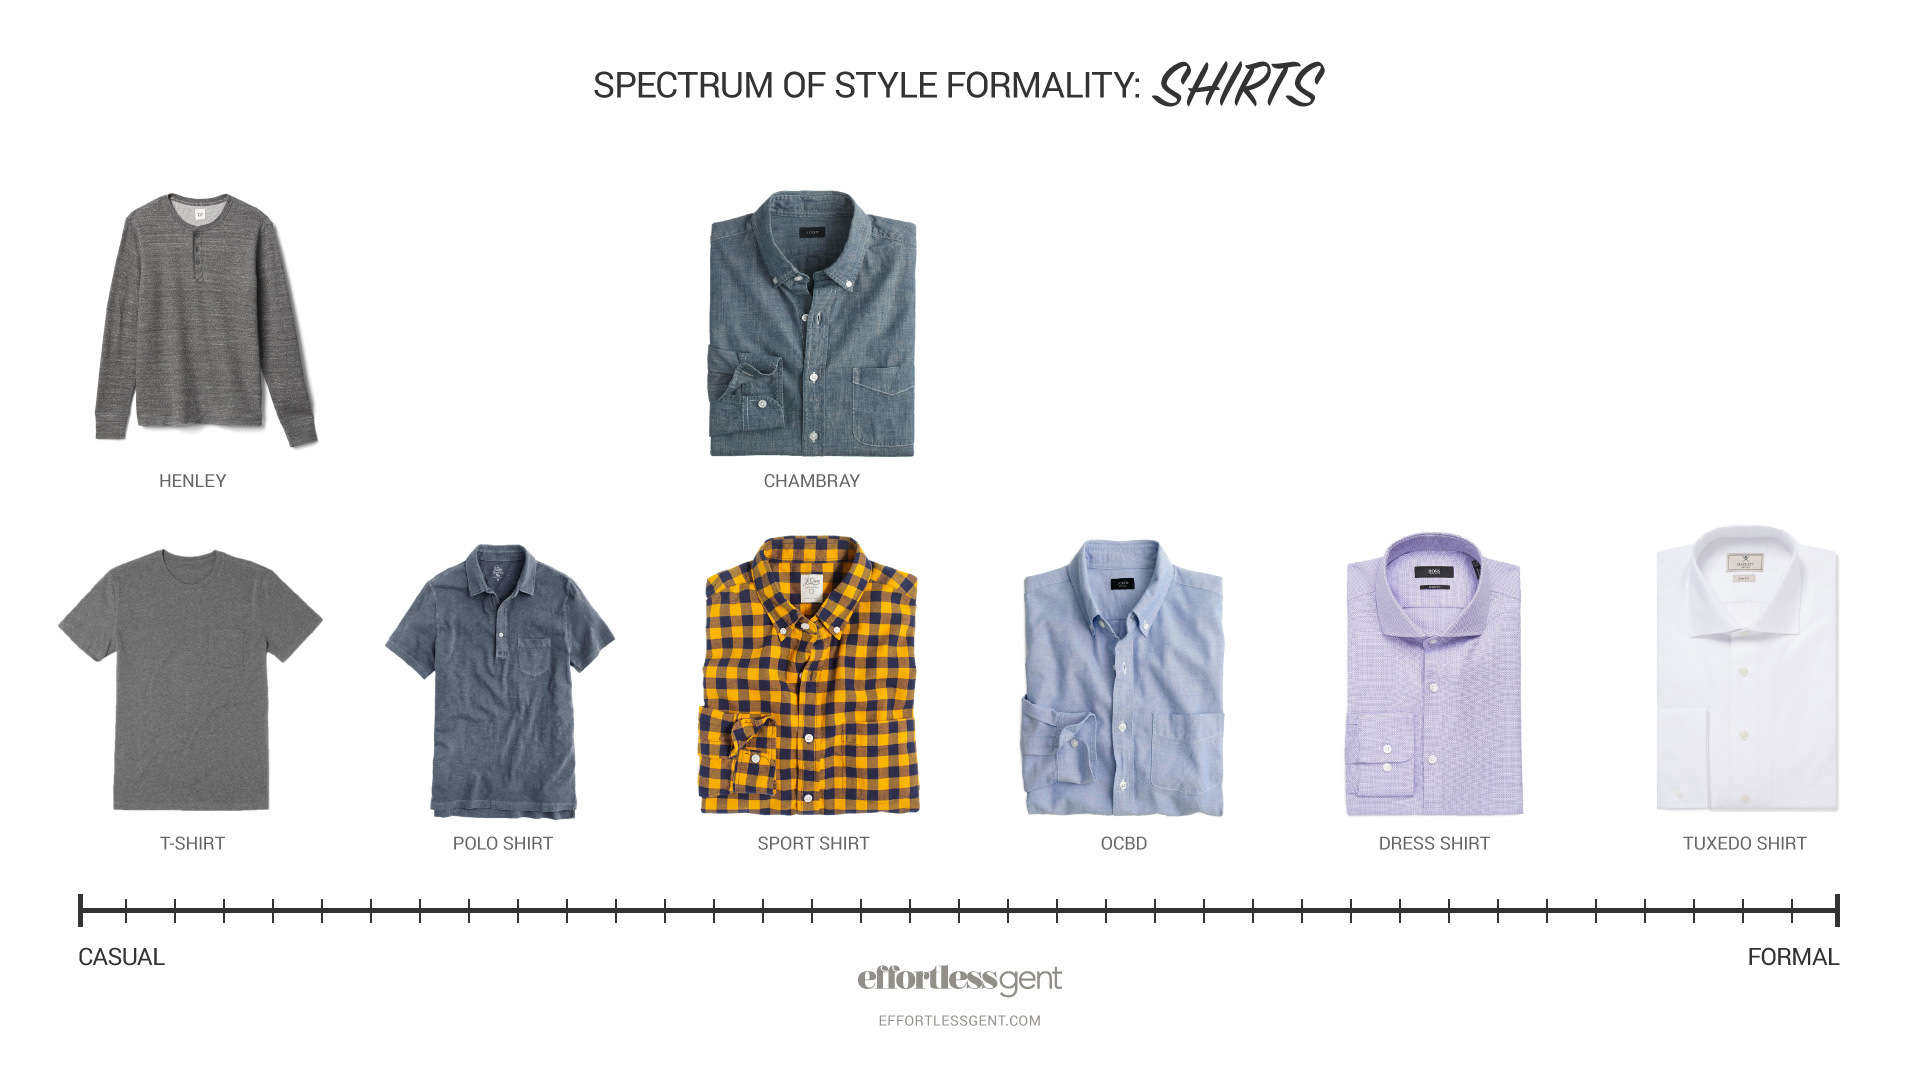 Spectrum of Style Formality: How to mix and match casual and dressy clothes